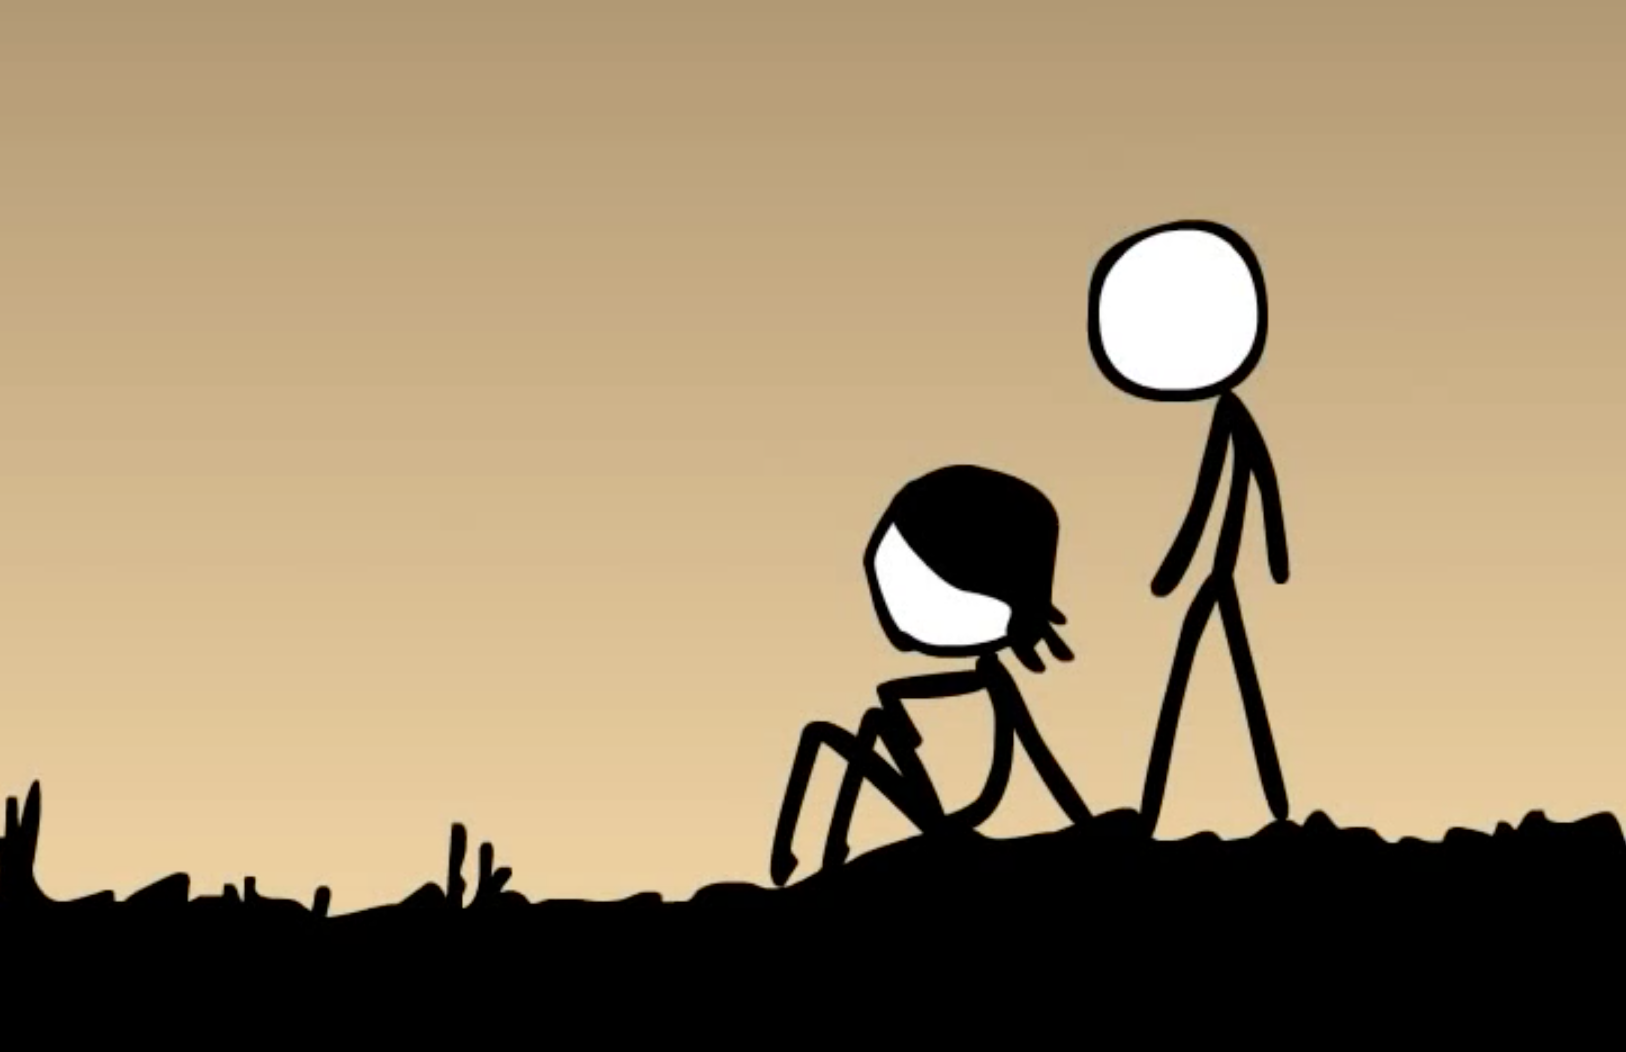 Stuff We Love: XKCD web comic is for people with brains and funny bones